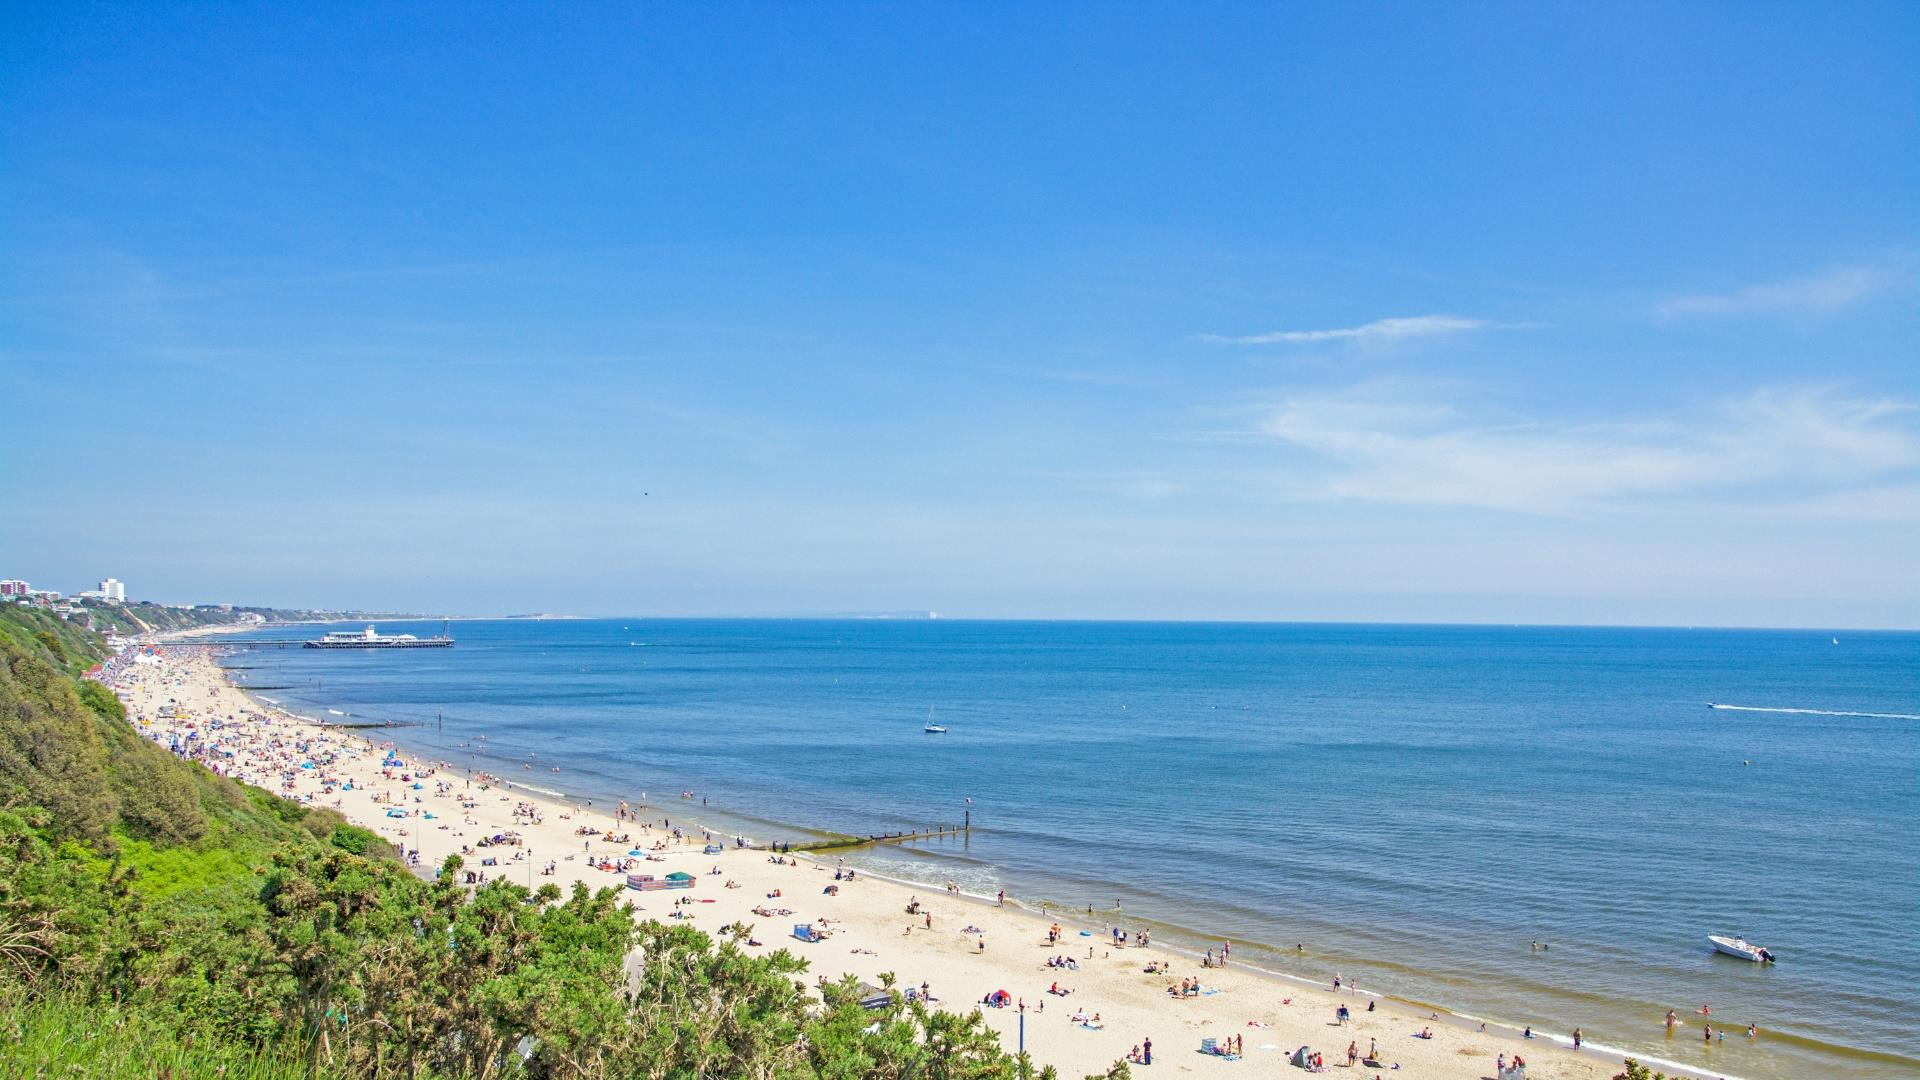 Shot looking over Bournemouth beach with visitors sunning themselves in the summer sun